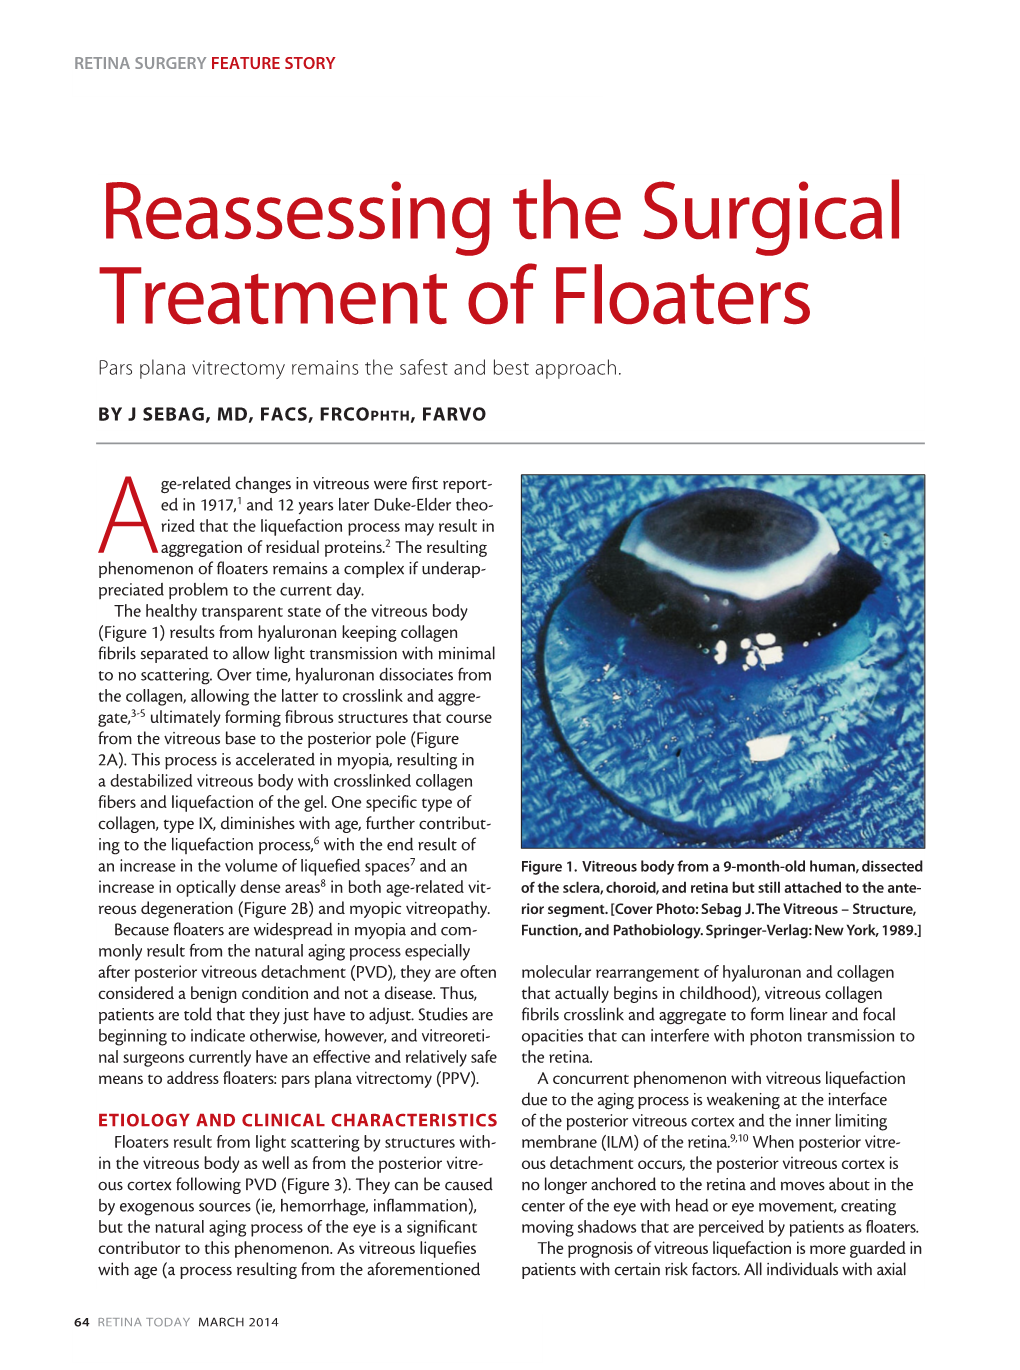 Reassessing the Surgical Treatment of Floaters Pars Plana Vitrectomy Remains the Safest and Best Approach